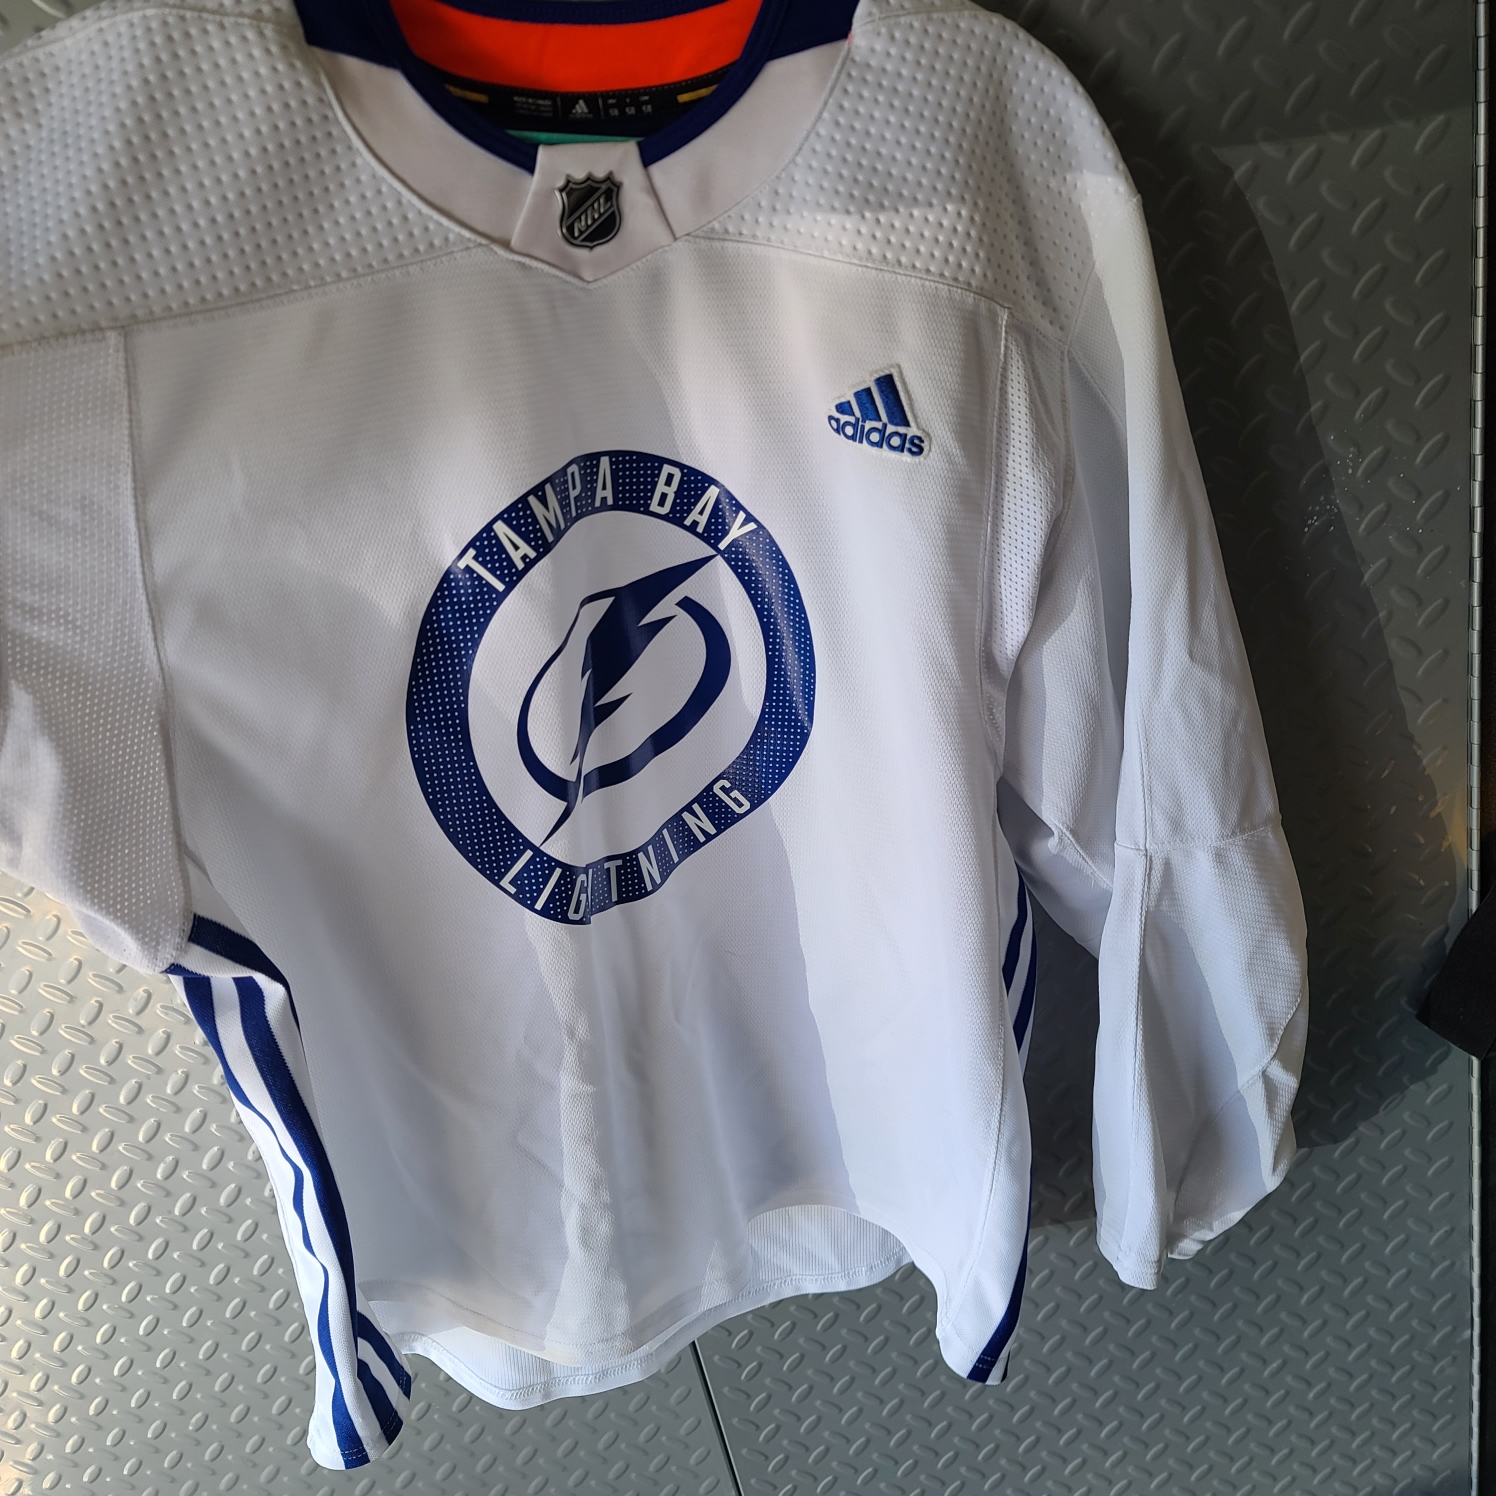 White Used Size 58 Men's Adidas Jersey